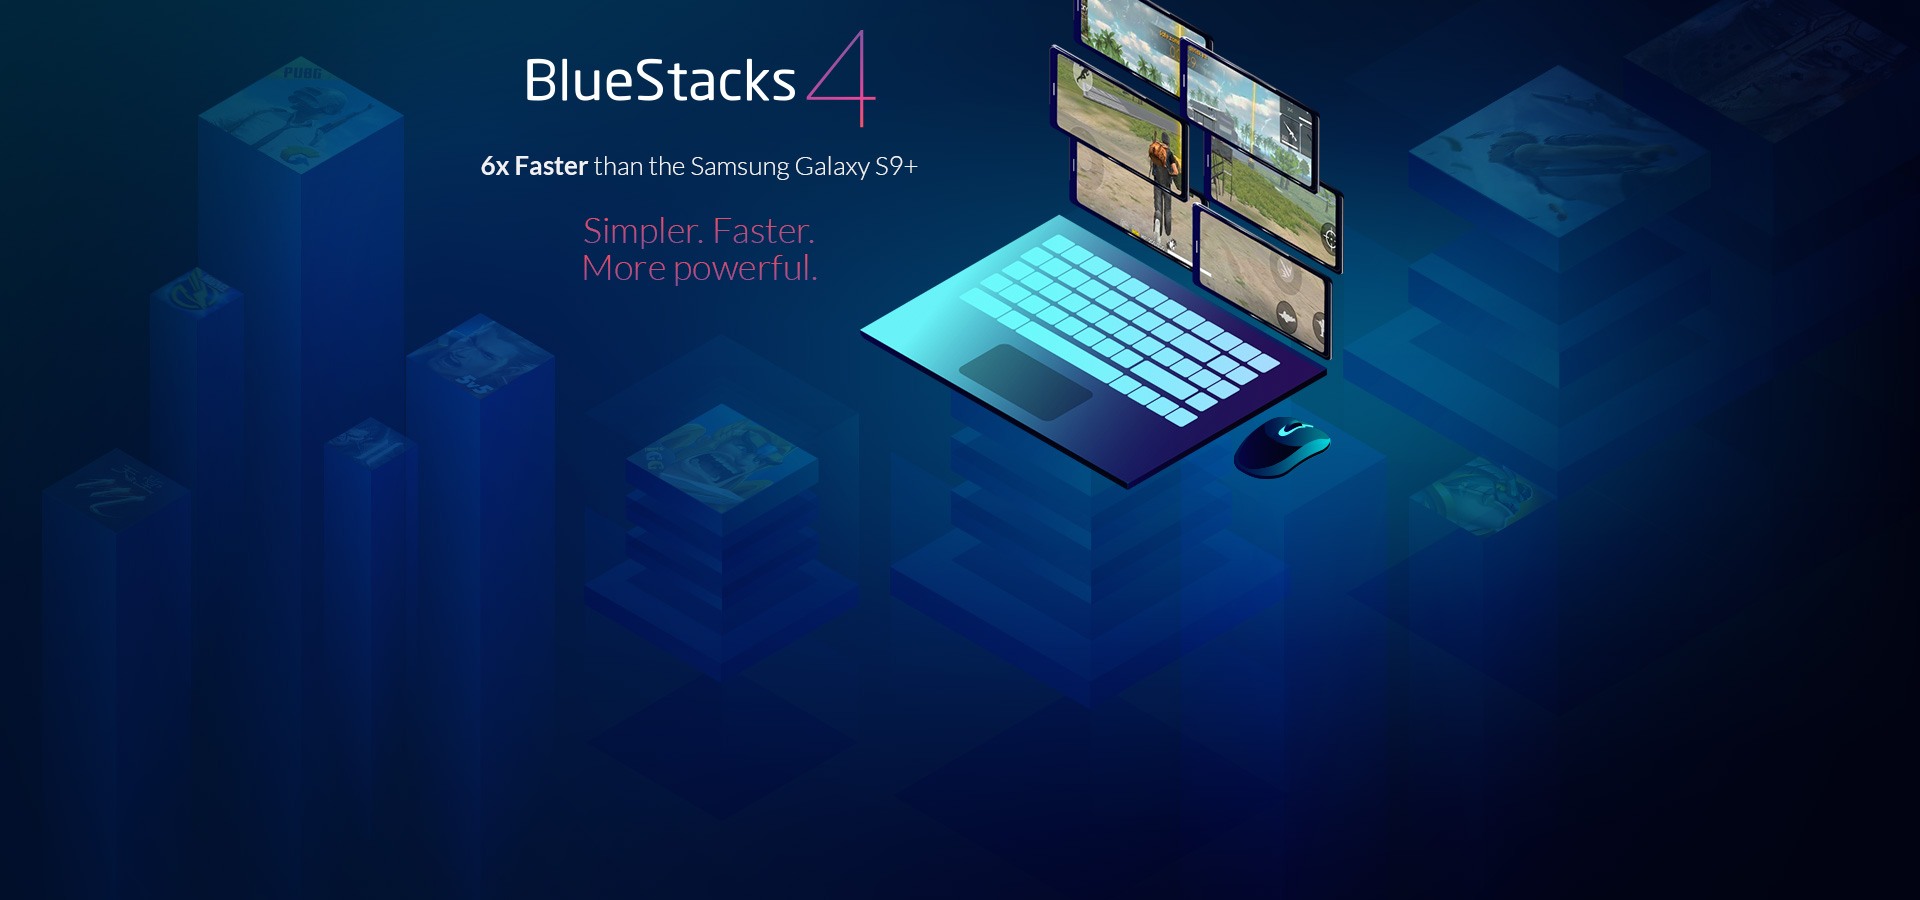 what android version is bluestacks